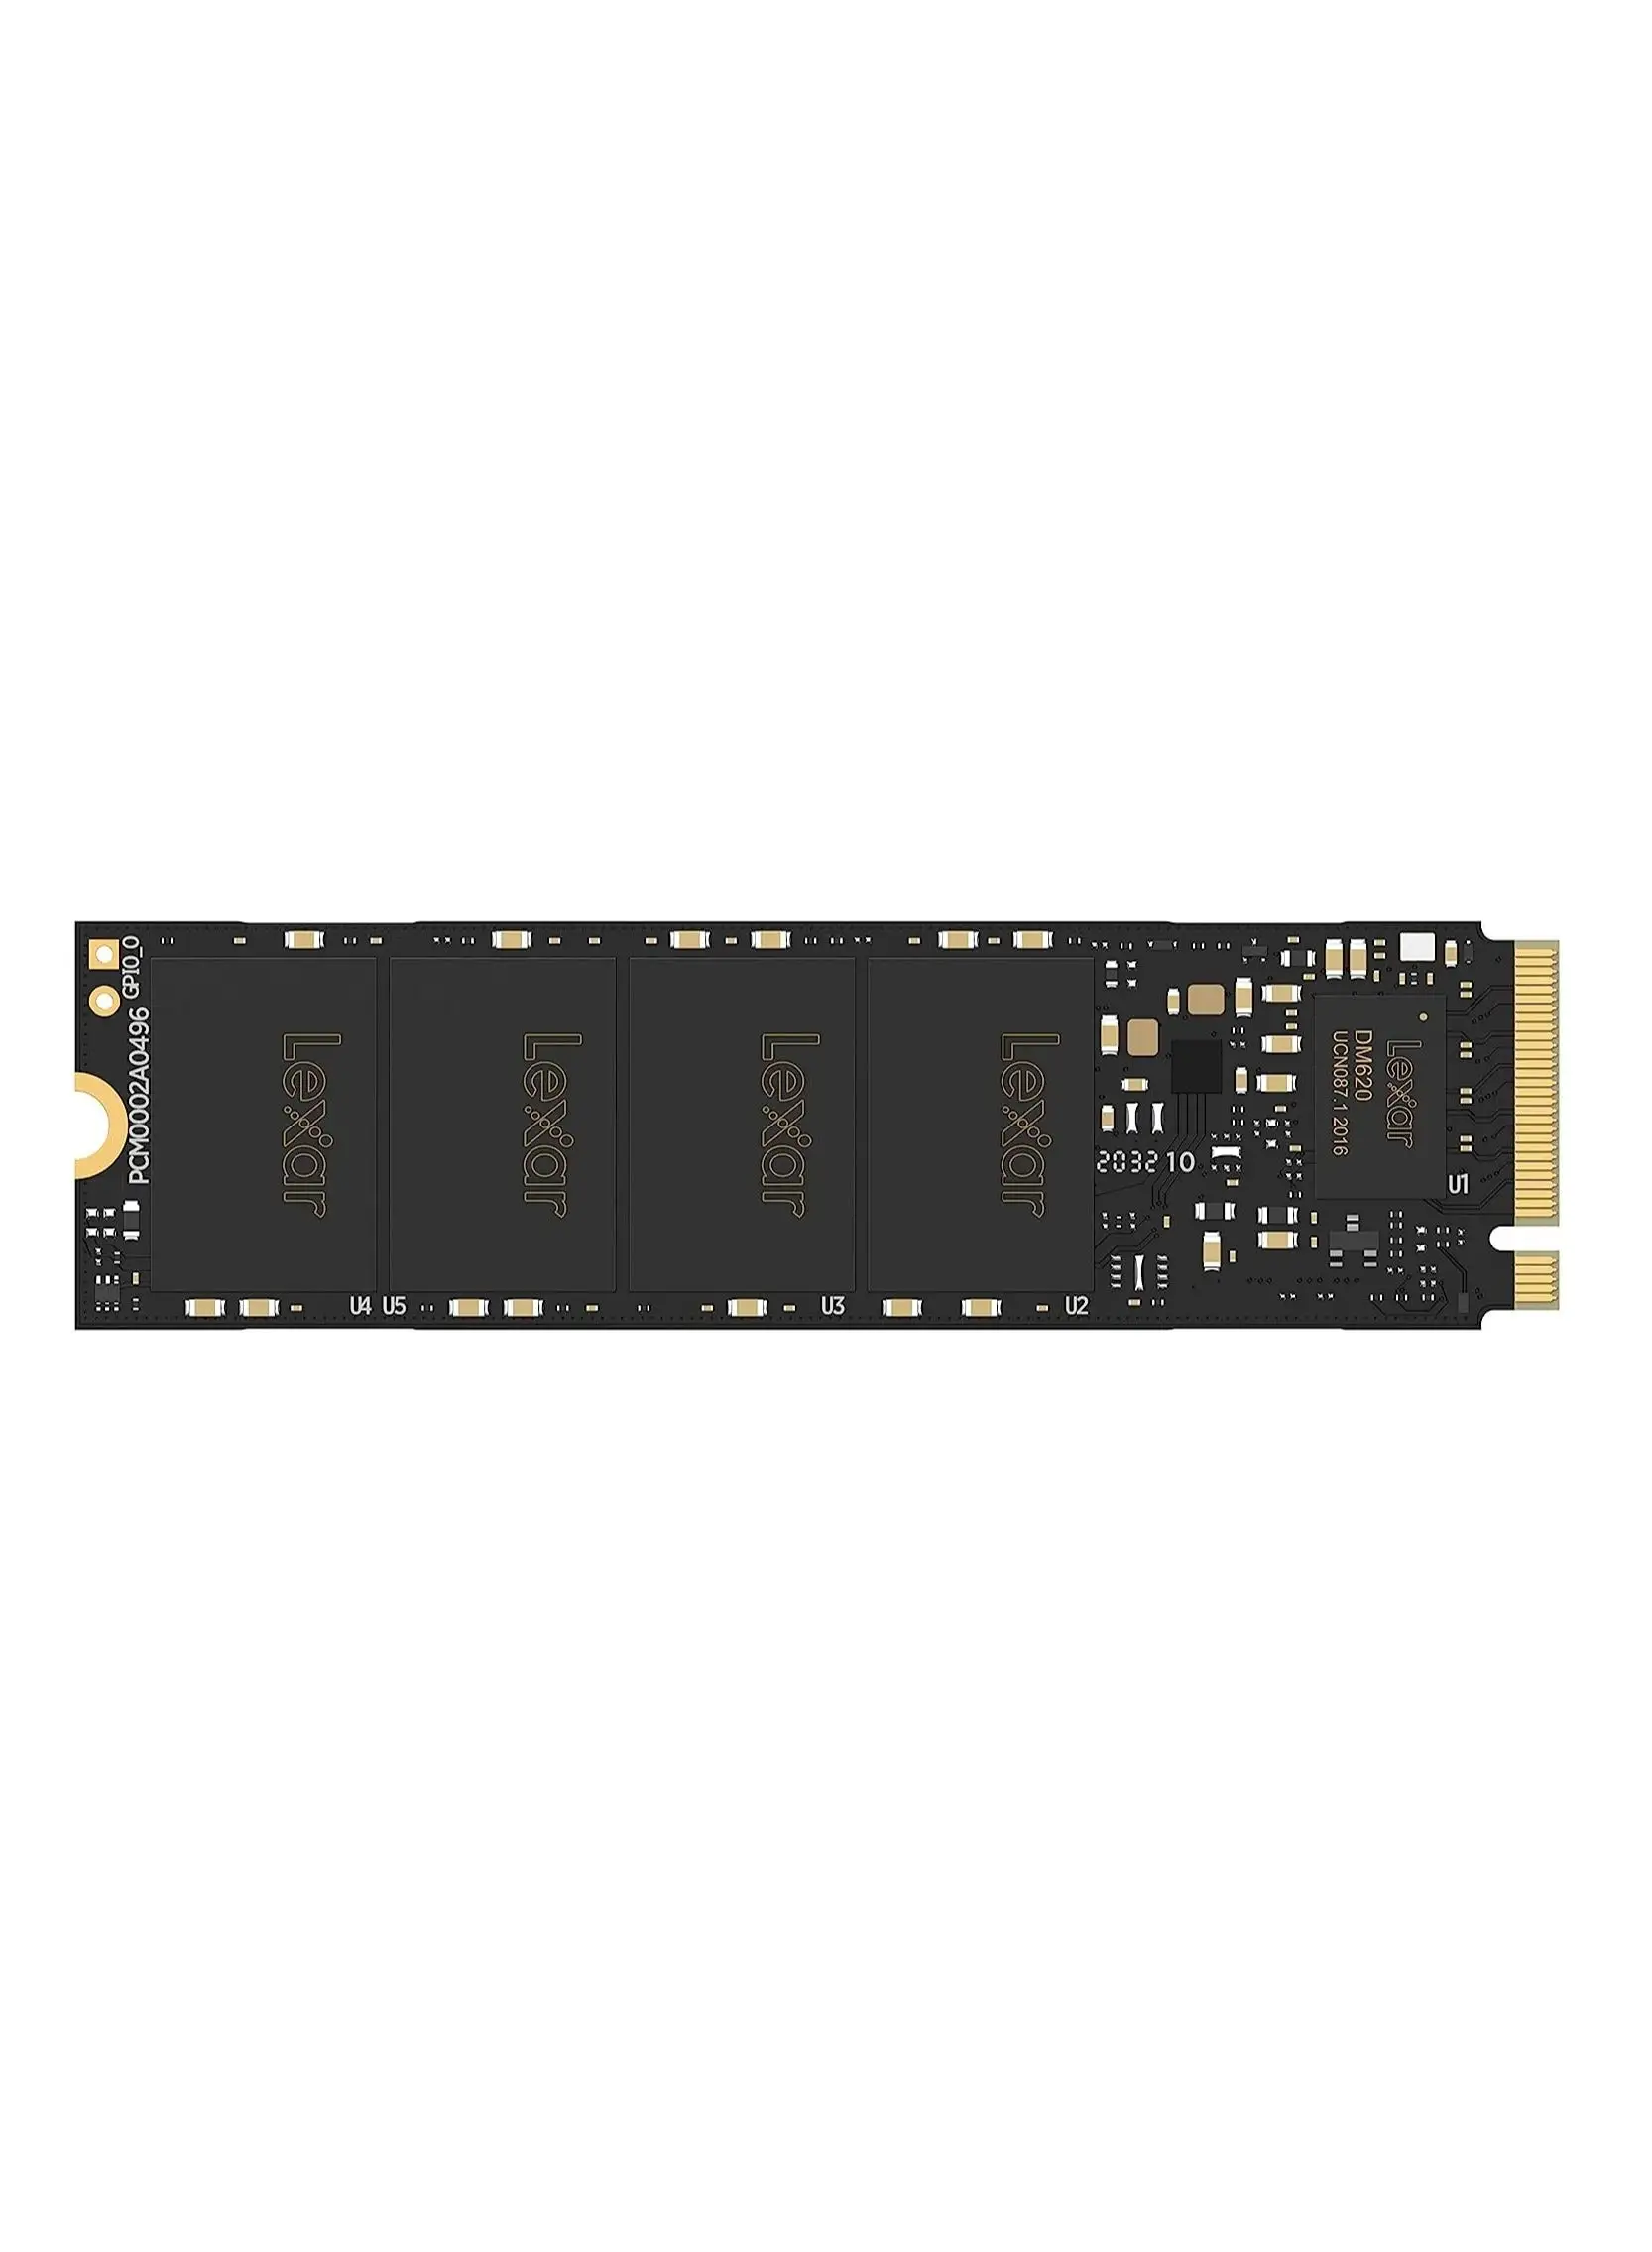 Lexar NM620 SSD PCIe Gen3 NVMe M.2 2280 Internal Solid State Drive, Up To 3500MB/s Read, For Gamers And PC Enthusiasts 512 GB